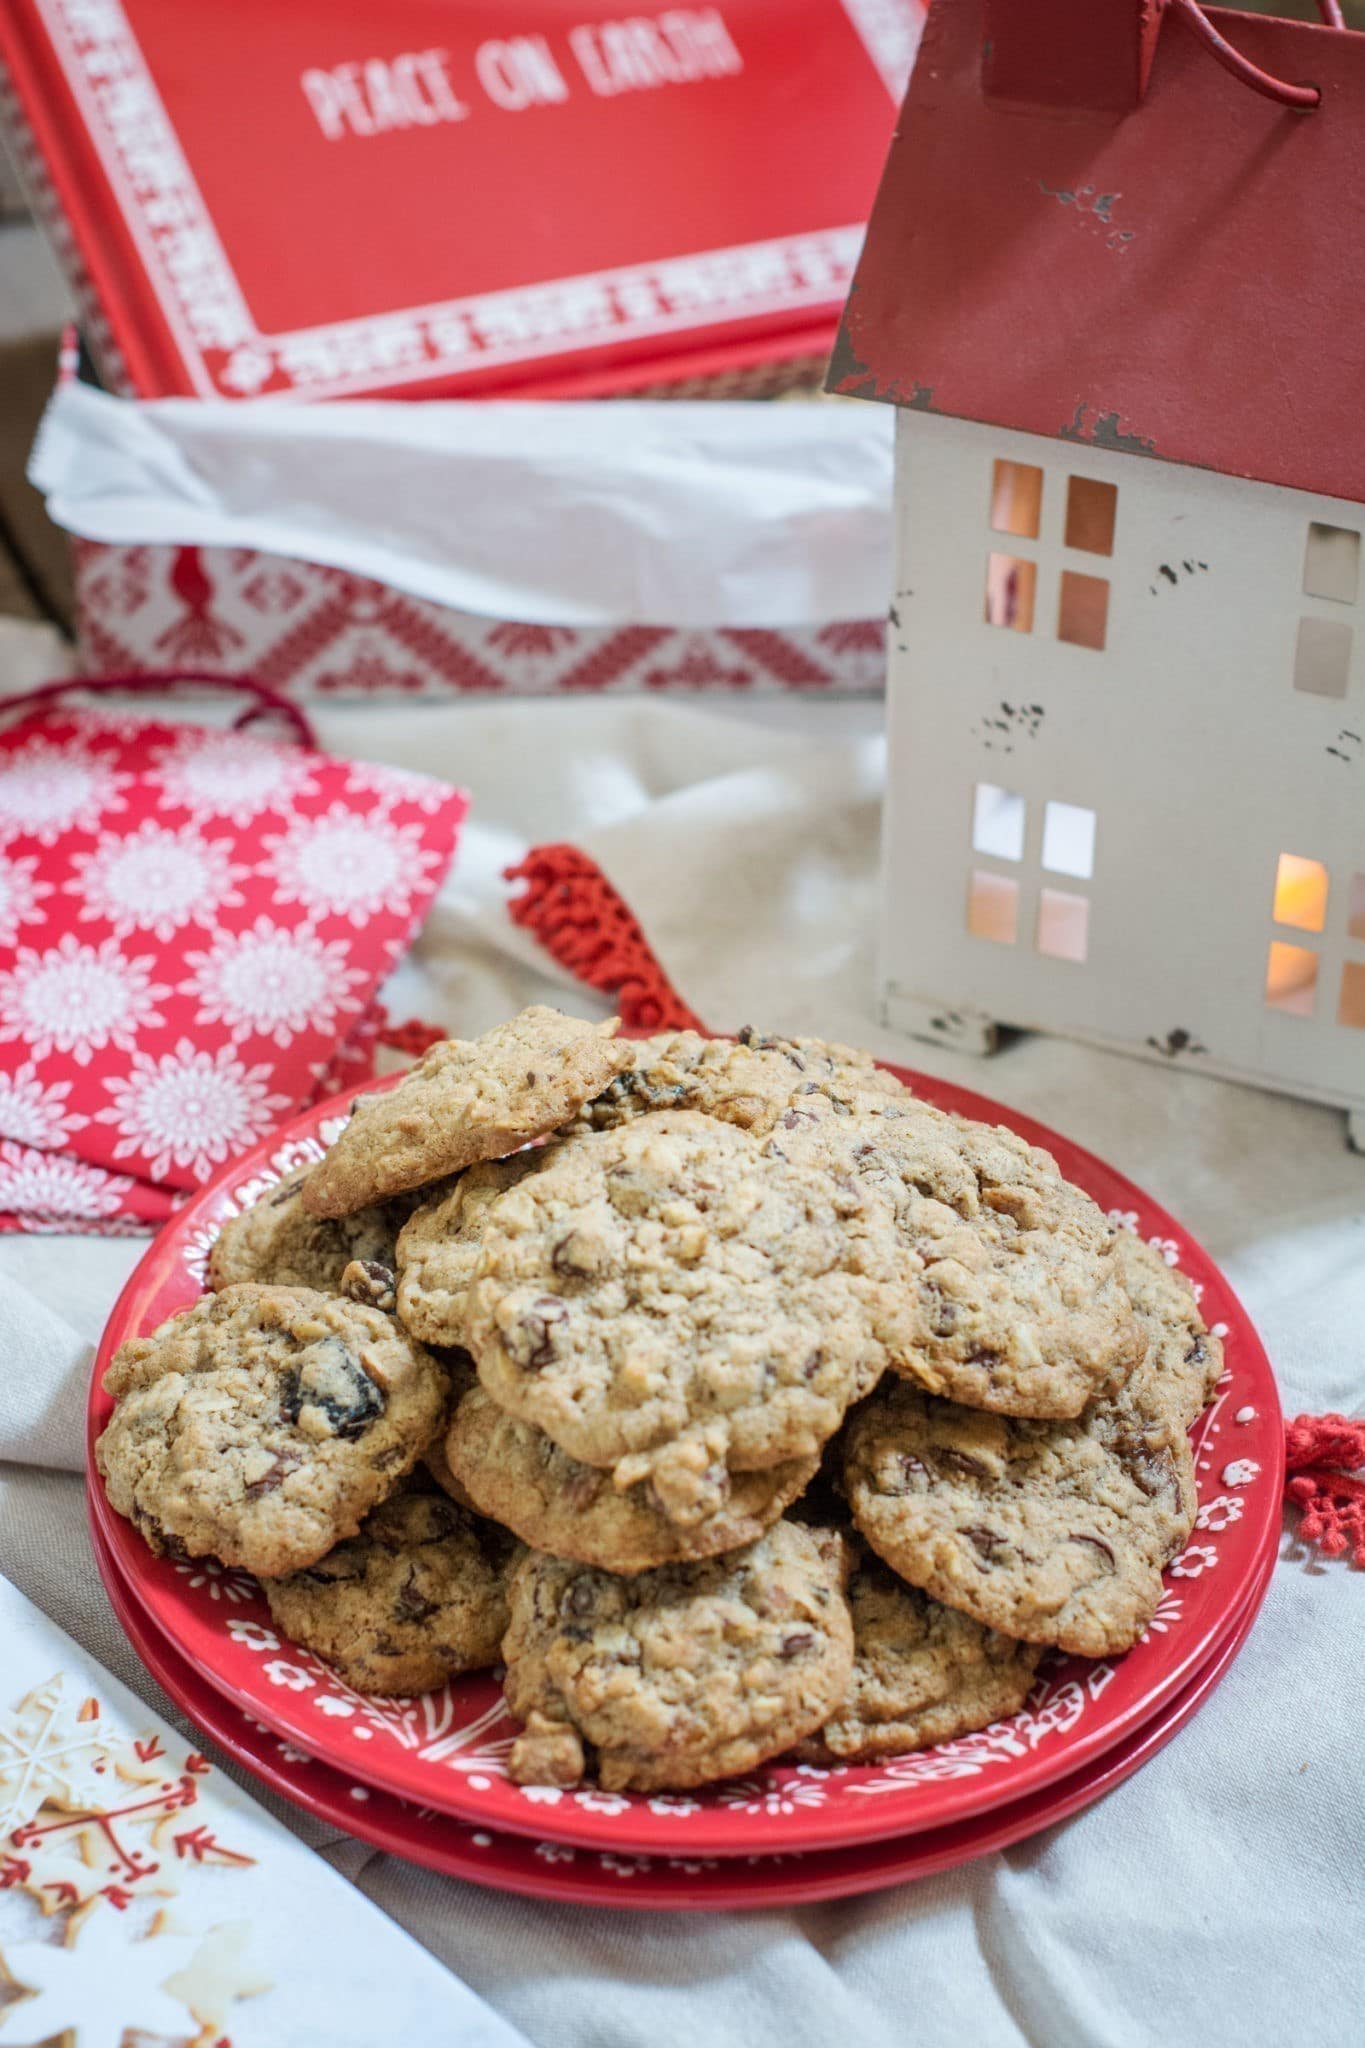 Easy Everything Cookies Recipe, the ideal recipe to use up your holiday baking leftovers! Enjoy for yourself, perfect for cookie swaps or enjoy giving as a gift from your kitchen! Get the Recipe at Little Figgy Food! #GiftThemJoy #WorldMarketTribe @WorldMarket #ad
#desserts #baking #holidayfoods #cookies #chocolate #cookieexchange #partyfoods